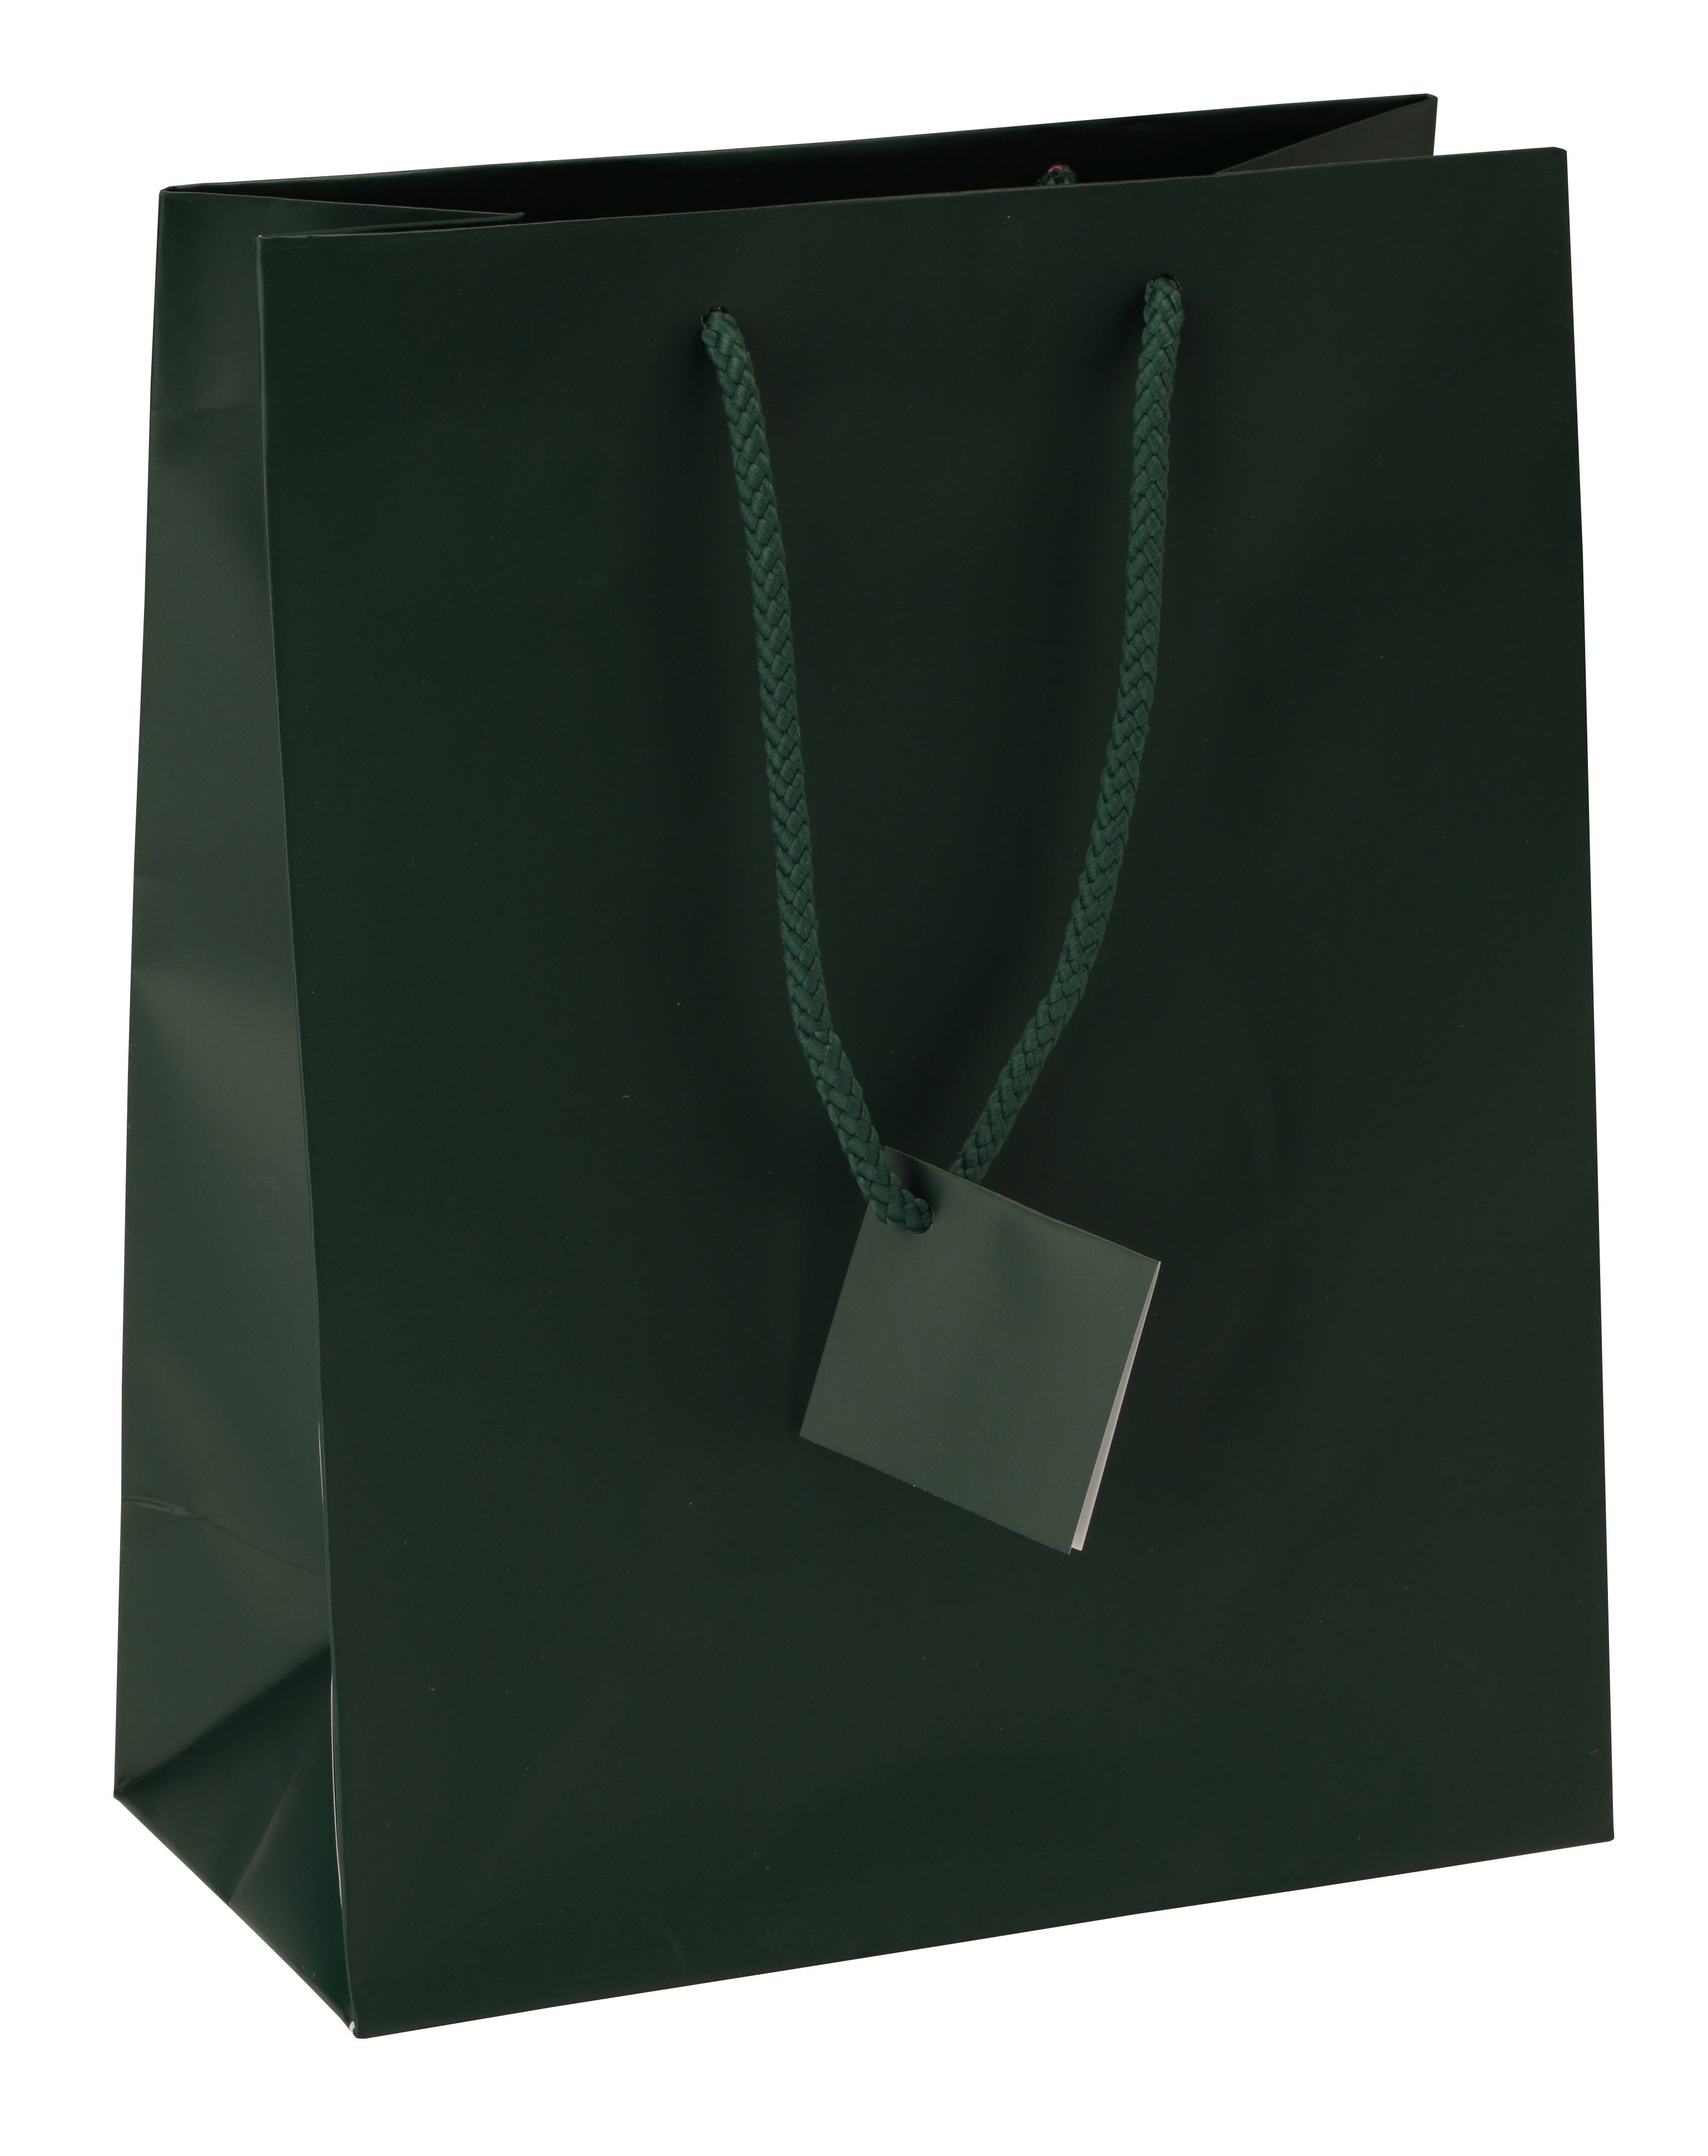 Satin-Finish Tote-Style Gift Bags in Jade Green